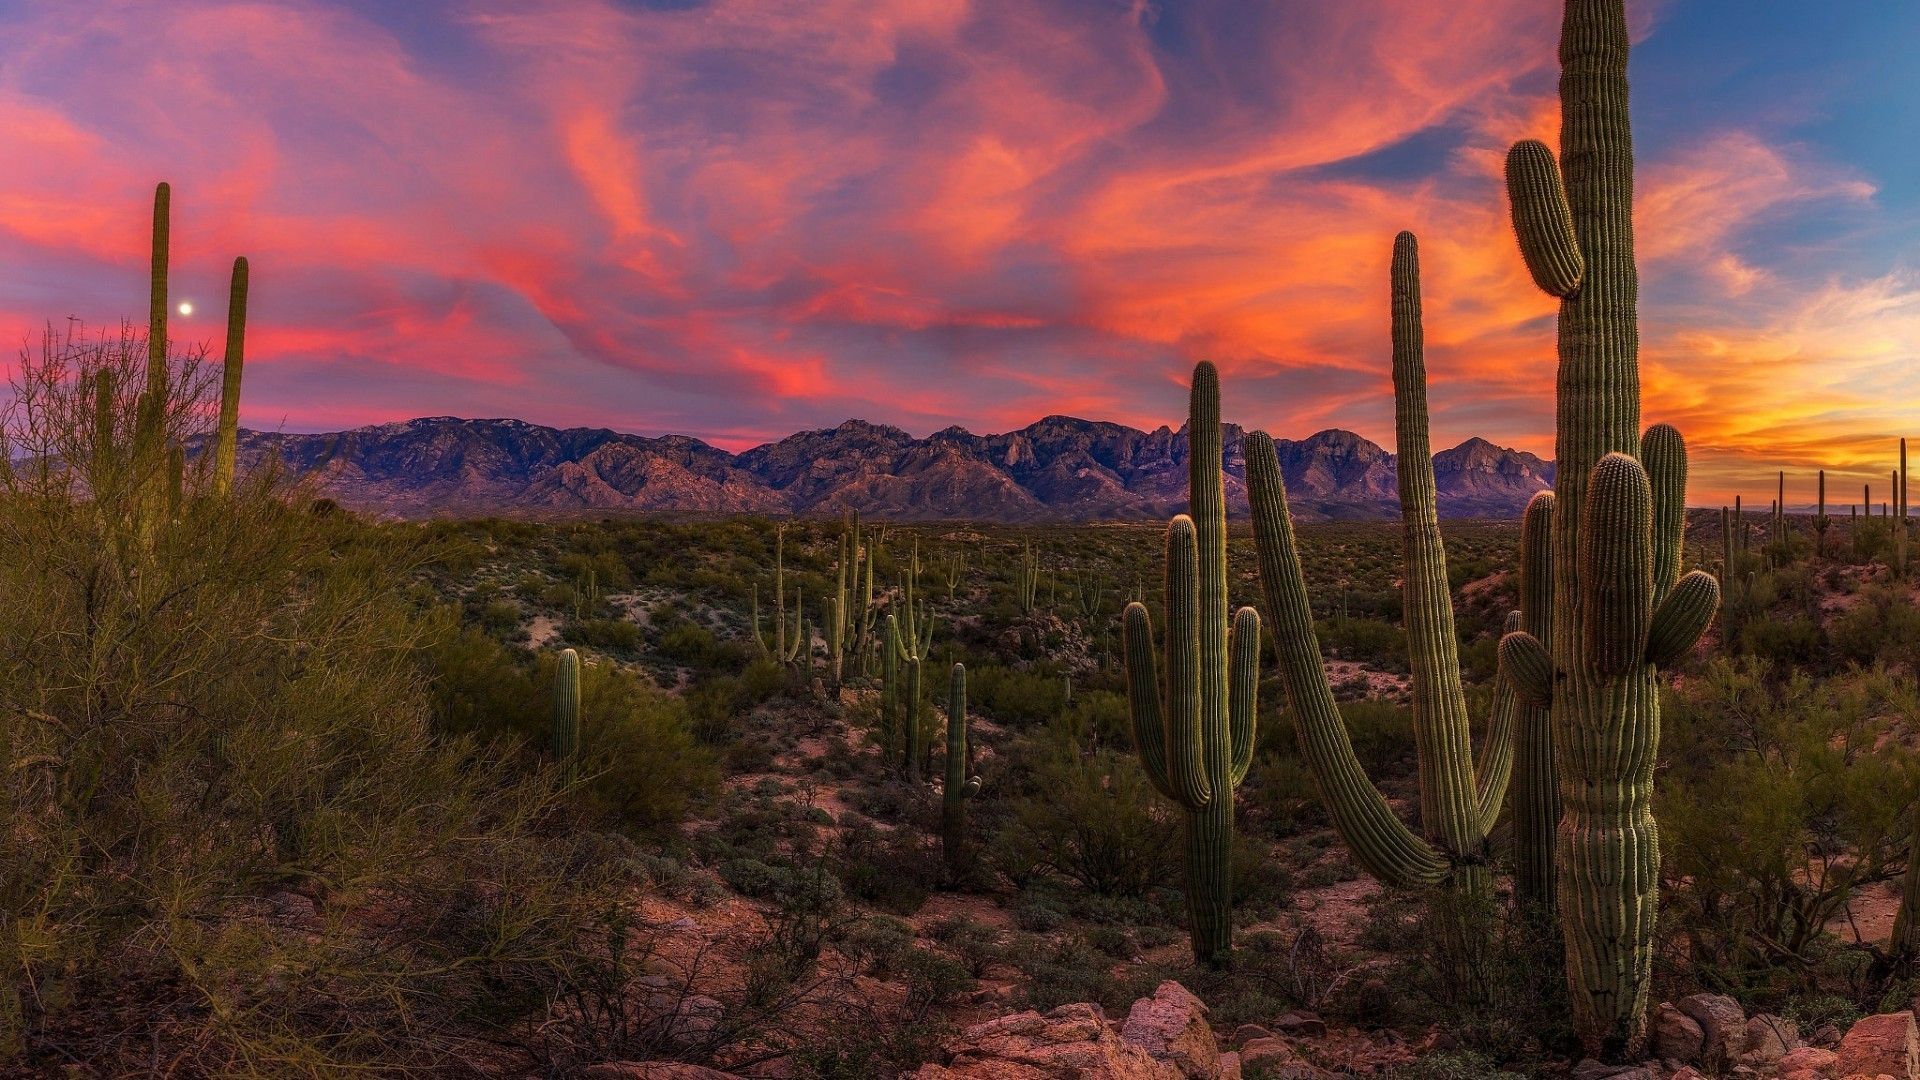 A beautiful sunset in the desert with cacti in the foreground. - Desert